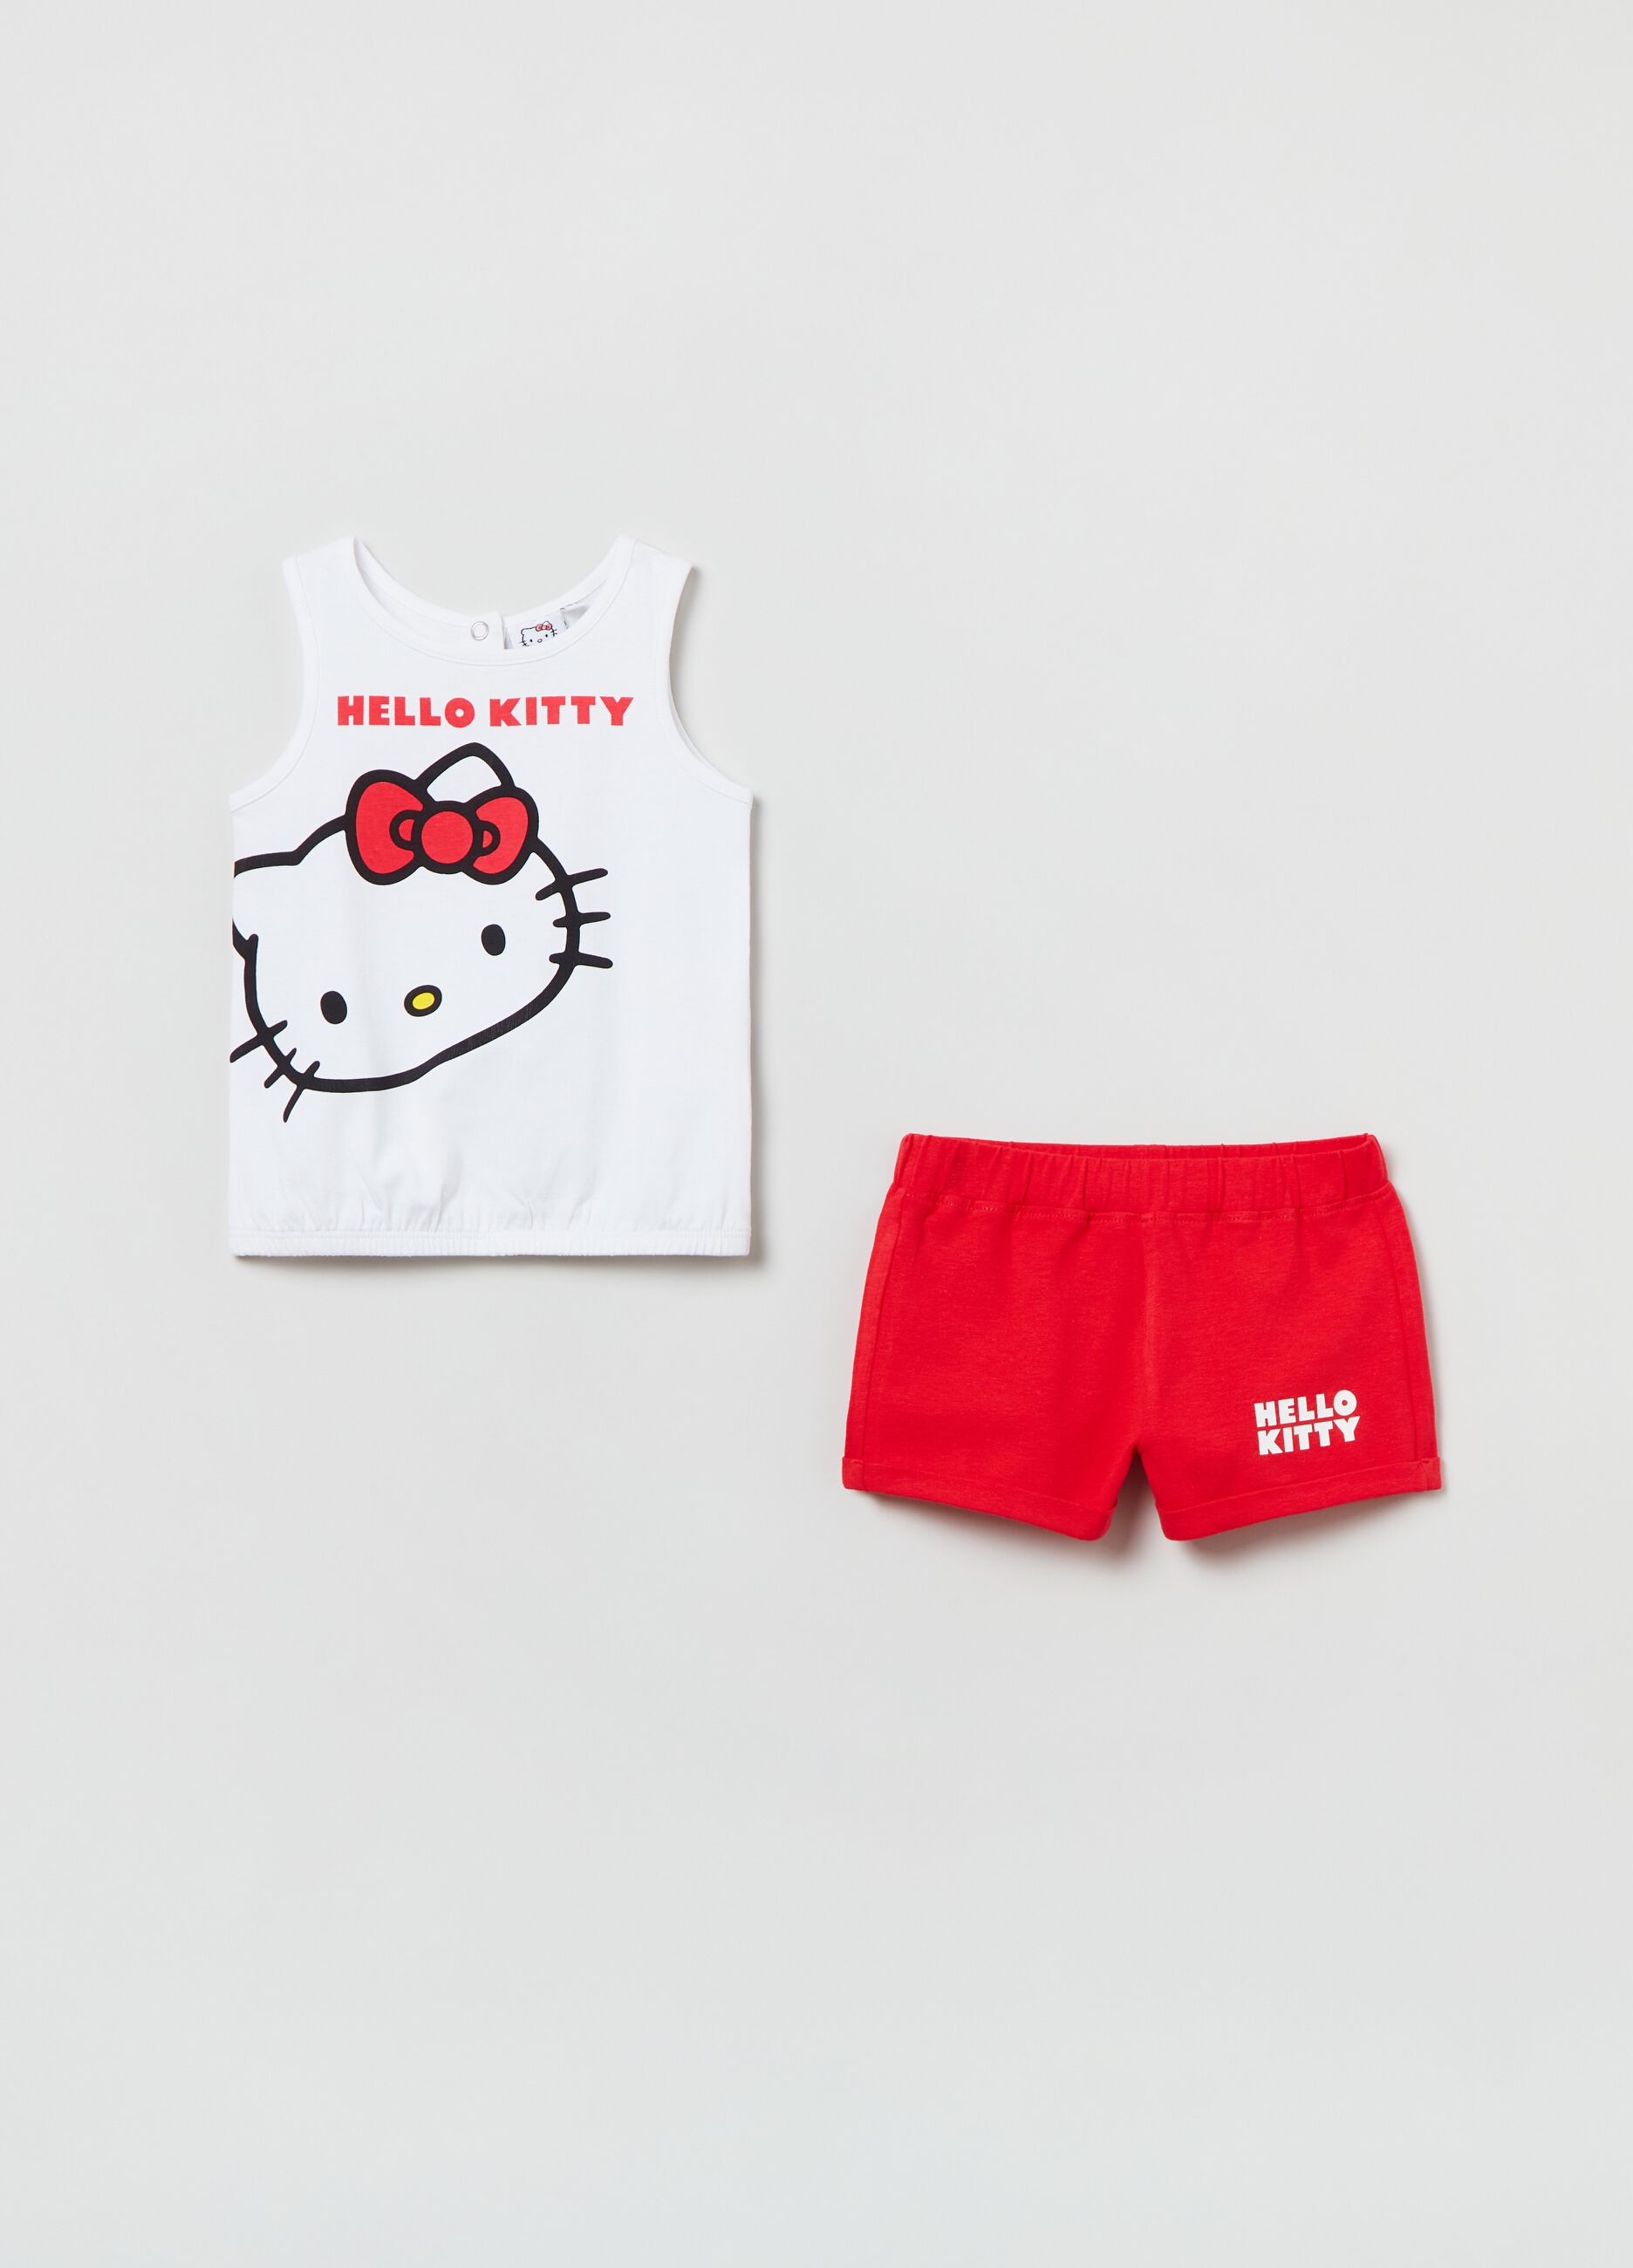 Stretch Hello Kitty shorts and tank top set